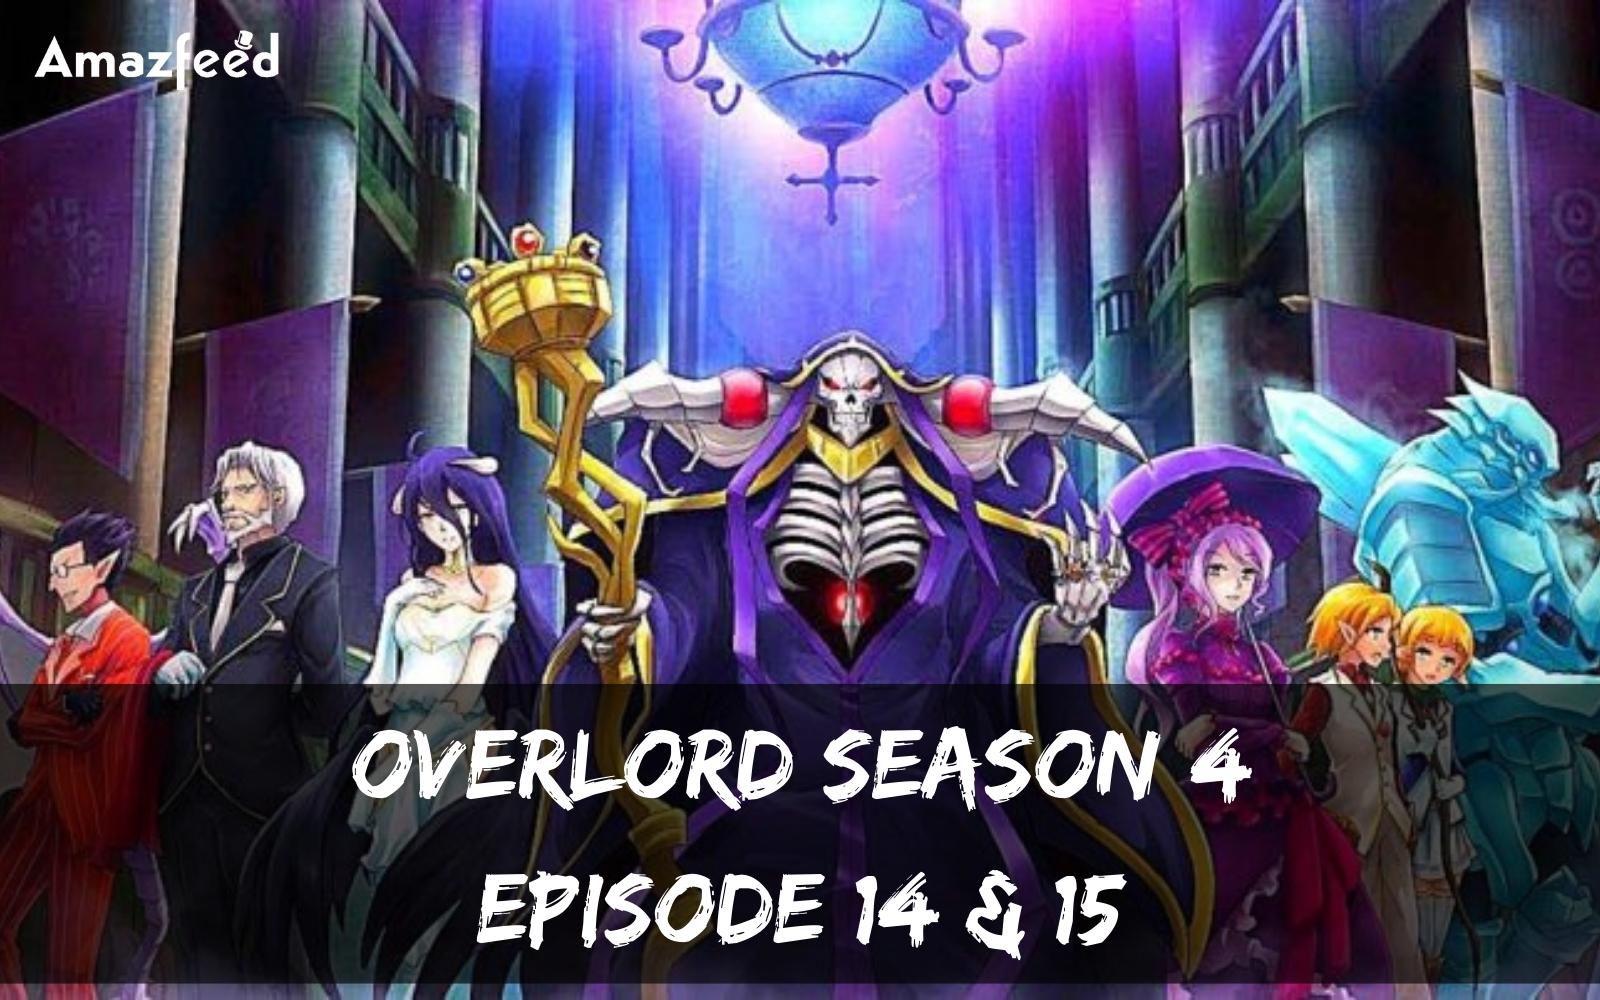 Overlord Season 4 Episode 14 & 15 is Coming Out? Is Overlord Season 4 ended? Current Status of Overlord Season 4